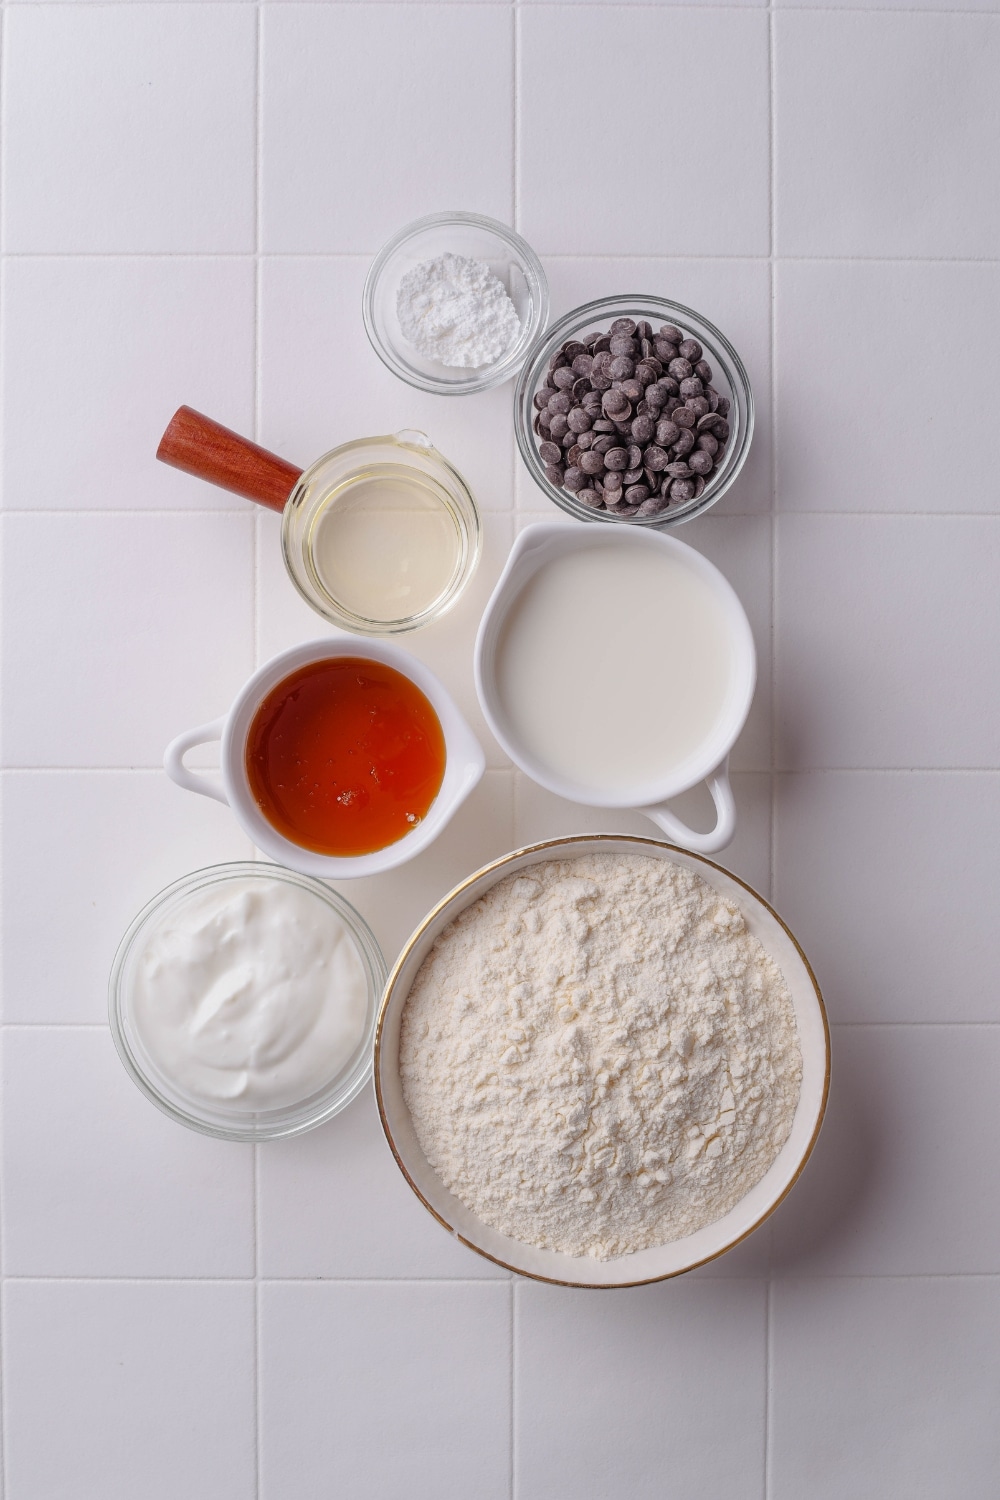 An overhead shot of various glass bowls holding different ingredients including flour, coconut milk, syrup, coconut cream, and chocolate chips.